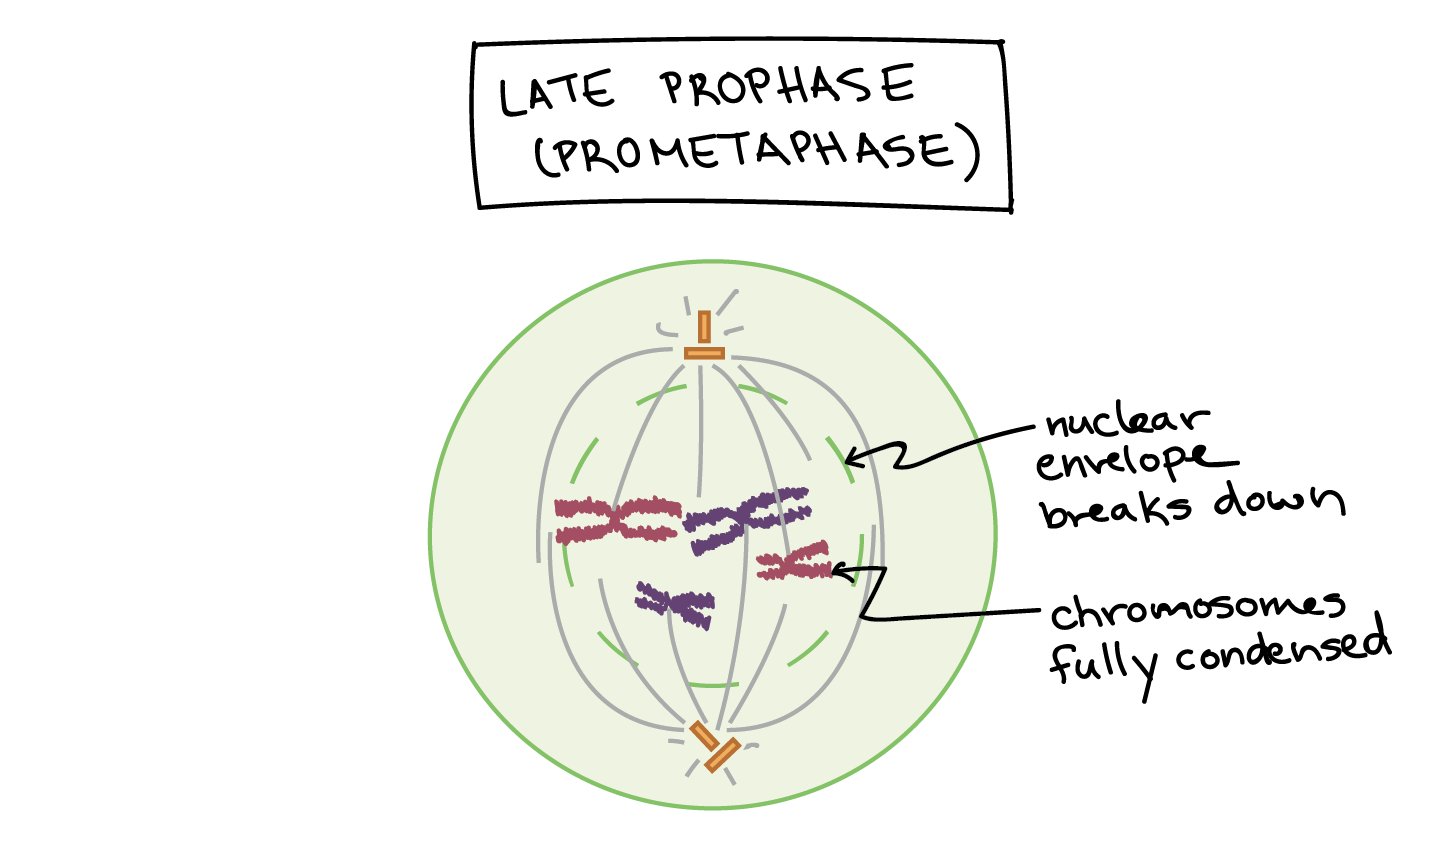 Late Prophase in mitosis